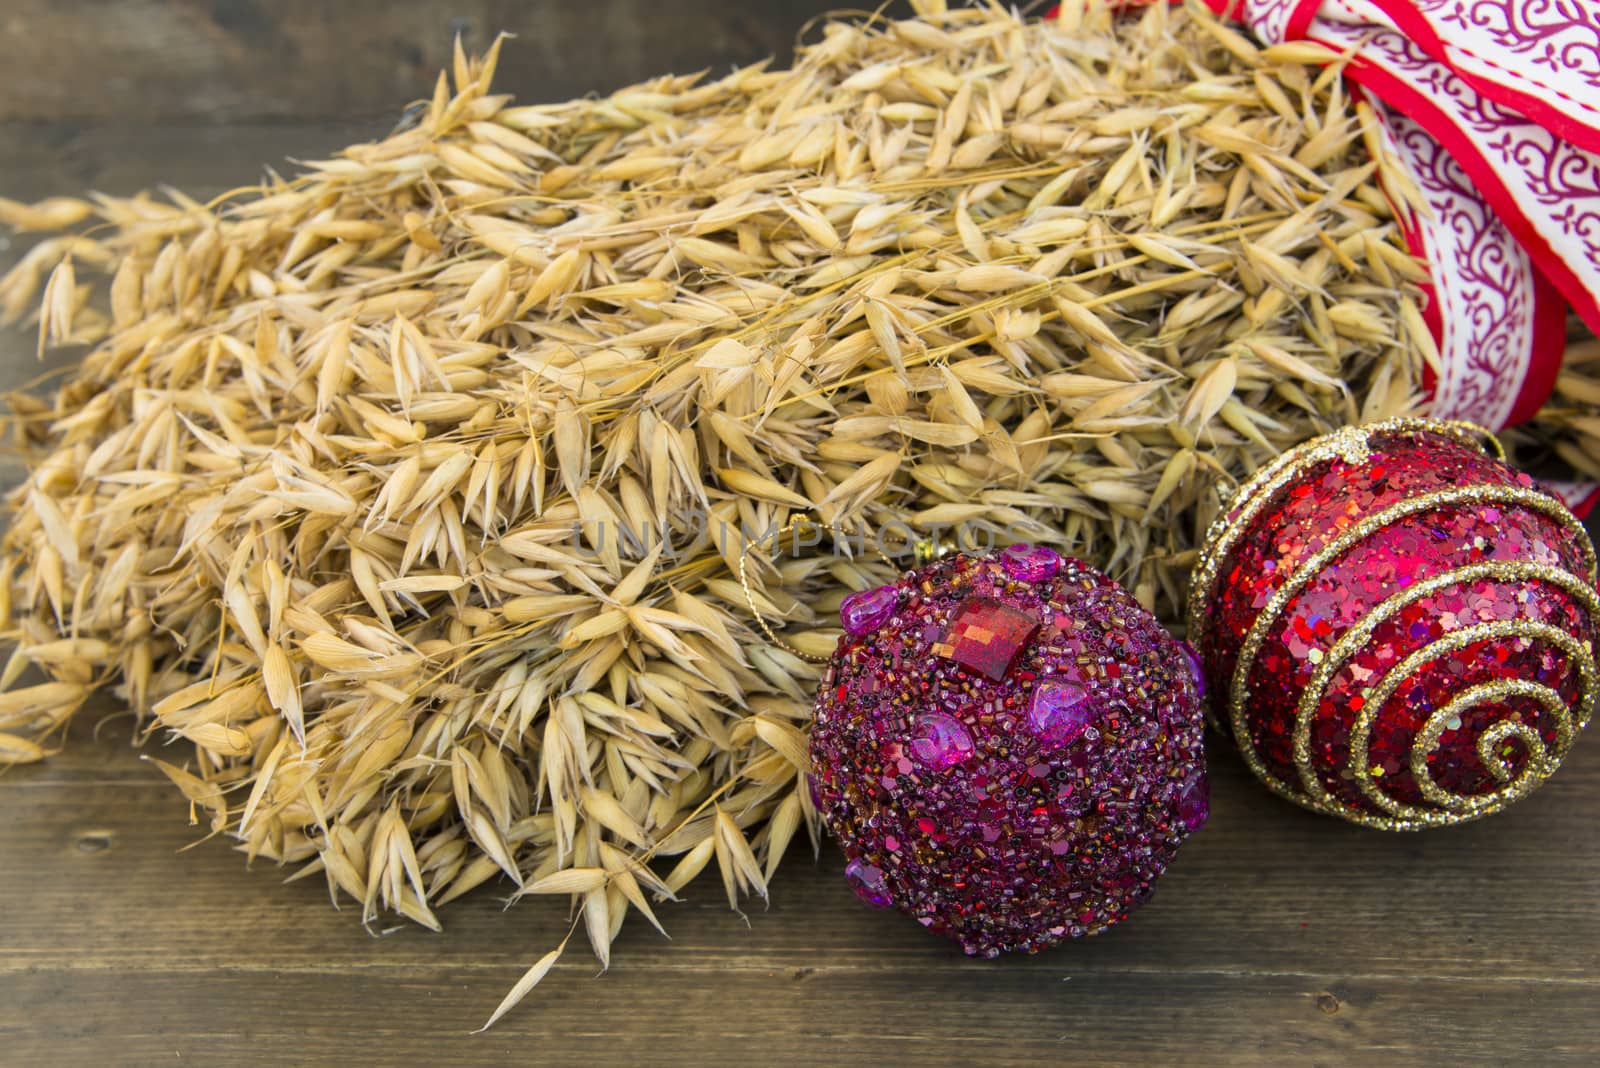 Two Christmas balls and a sheaf with ribbon